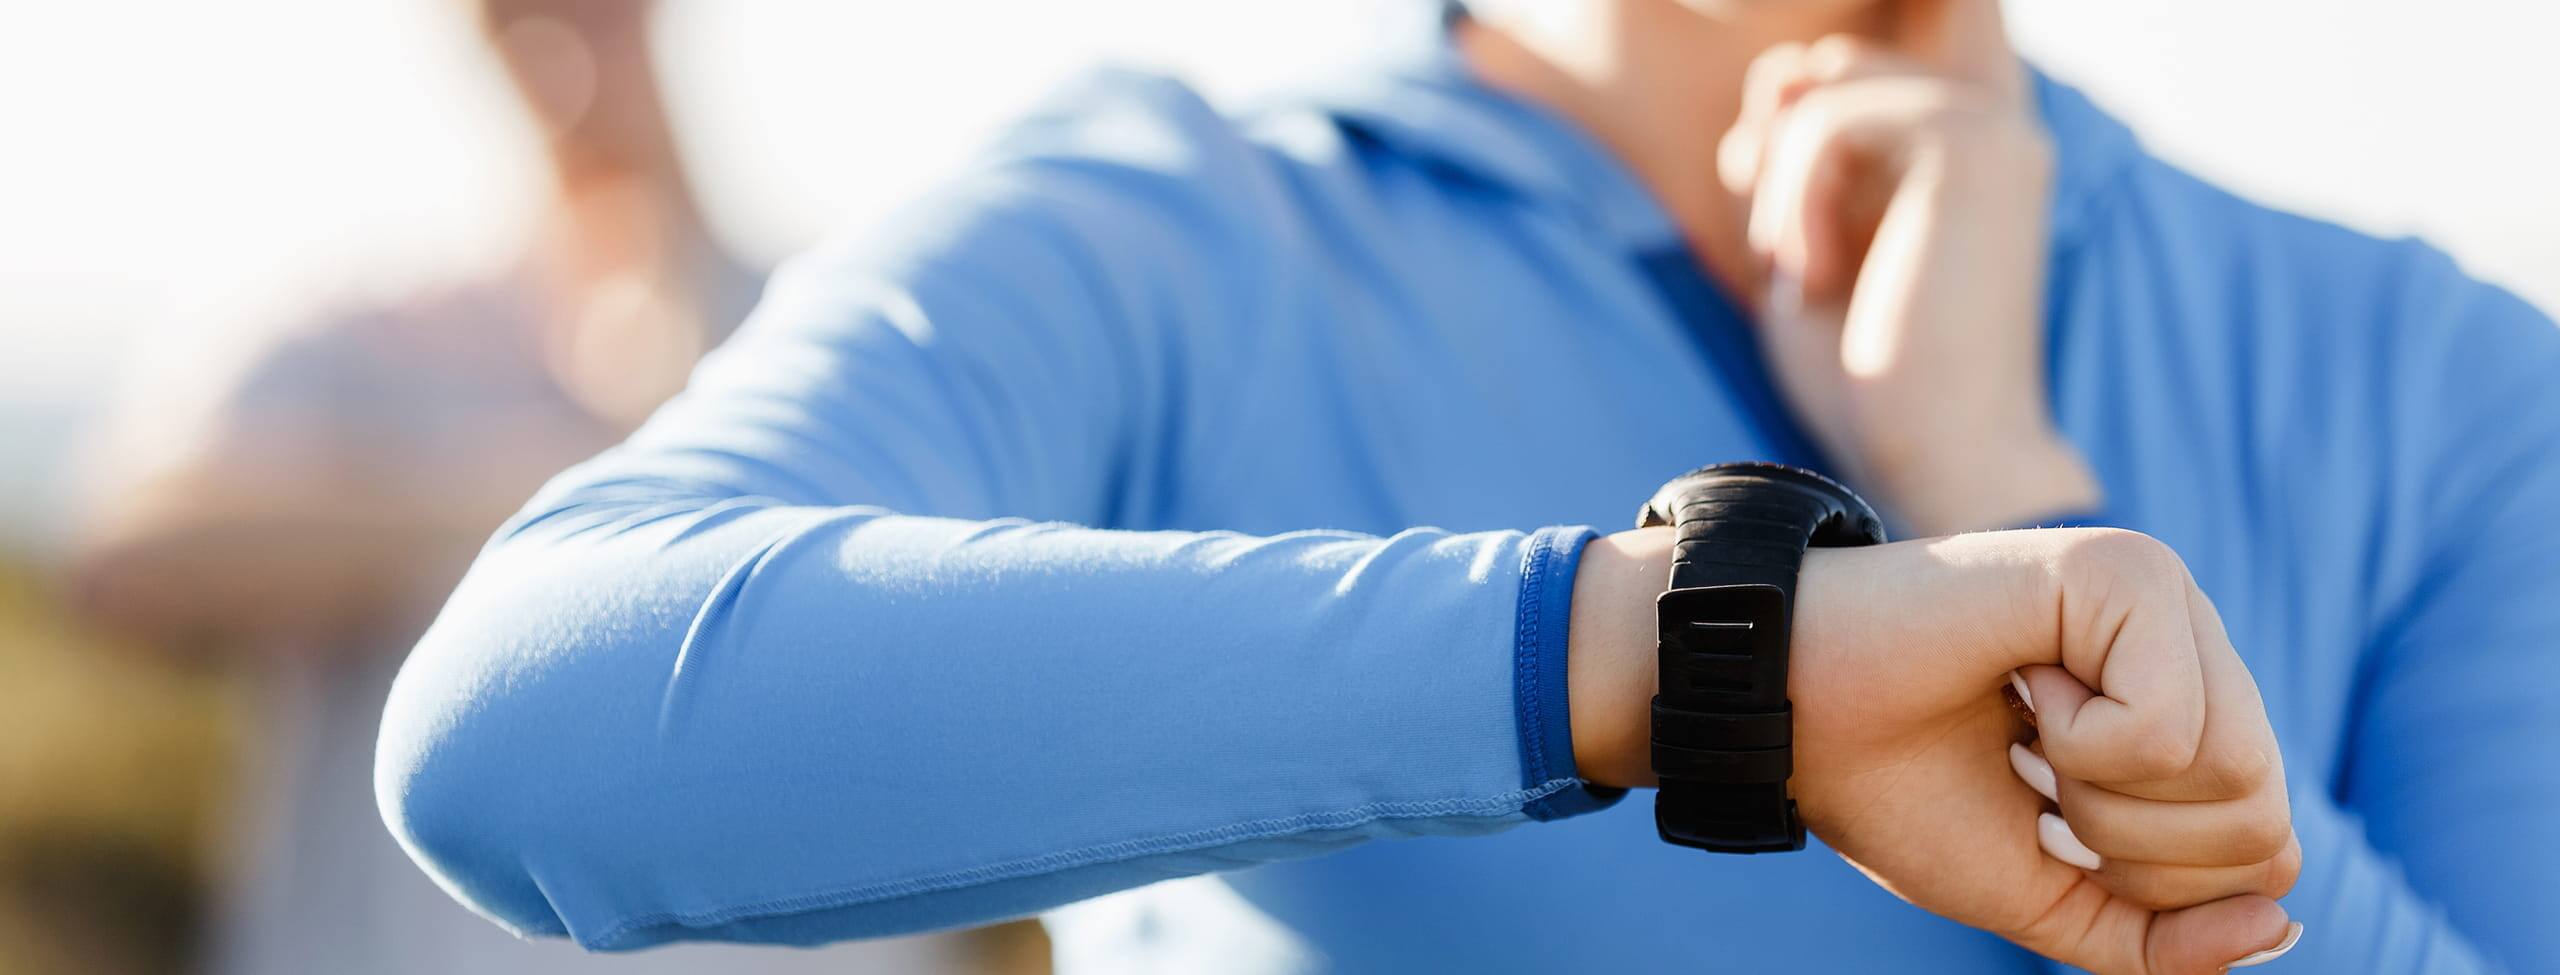 Woman monitoring her heart rate with smart watch